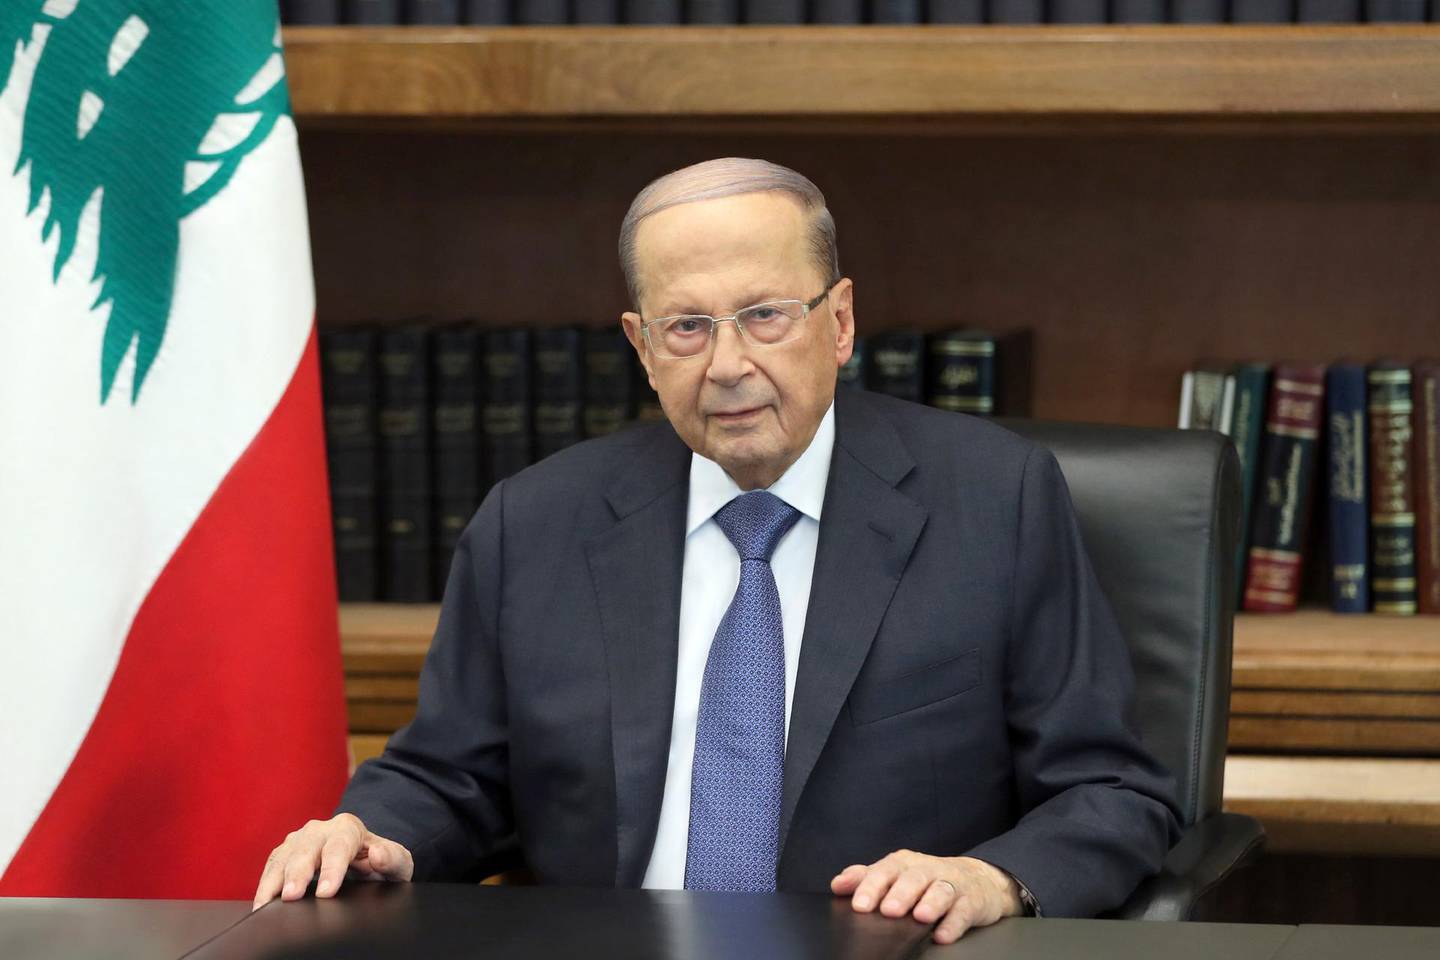 BEIRUT, LEBANON - OCTOBER 24: (----EDITORIAL USE ONLY  MANDATORY CREDIT - "LEBANESE PRESIDENCY / HANDOUT" - NO MARKETING NO ADVERTISING CAMPAIGNS - DISTRIBUTED AS A SERVICE TO CLIENTS----) Lebanese President Michel Aoun speaks regarding the ongoing anti-government protests as he attends a live broadcast, in Beirut, Lebanon on October 24, 2019.
 (Photo by Presidency of Lebanon / Handout/Anadolu Agency via Getty Images)